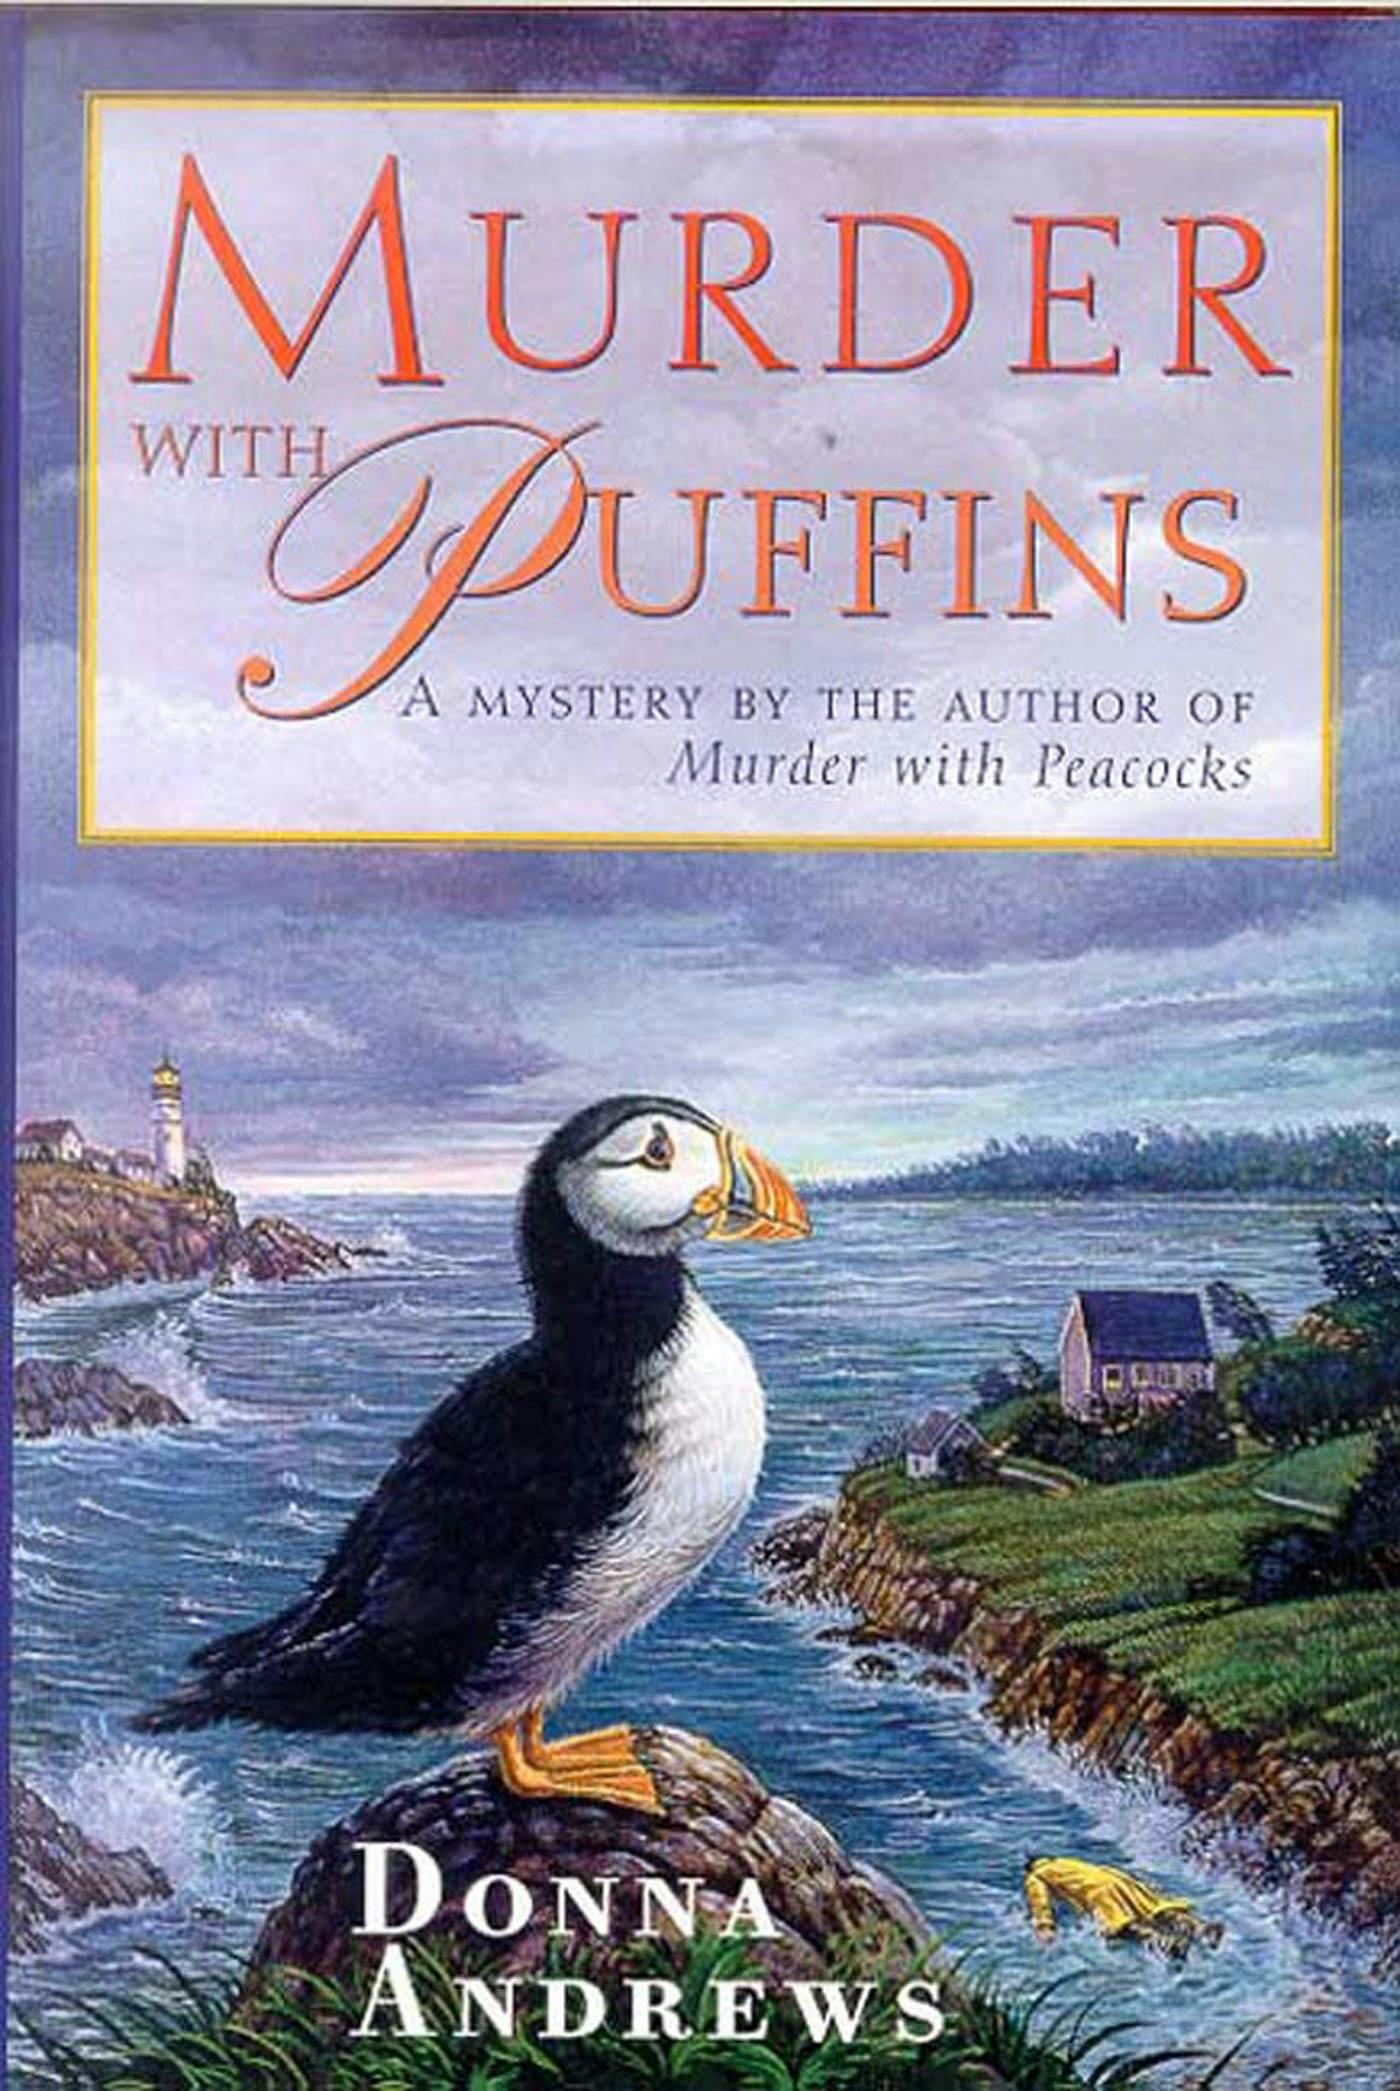 Play with Me (Picture Puffin Books)